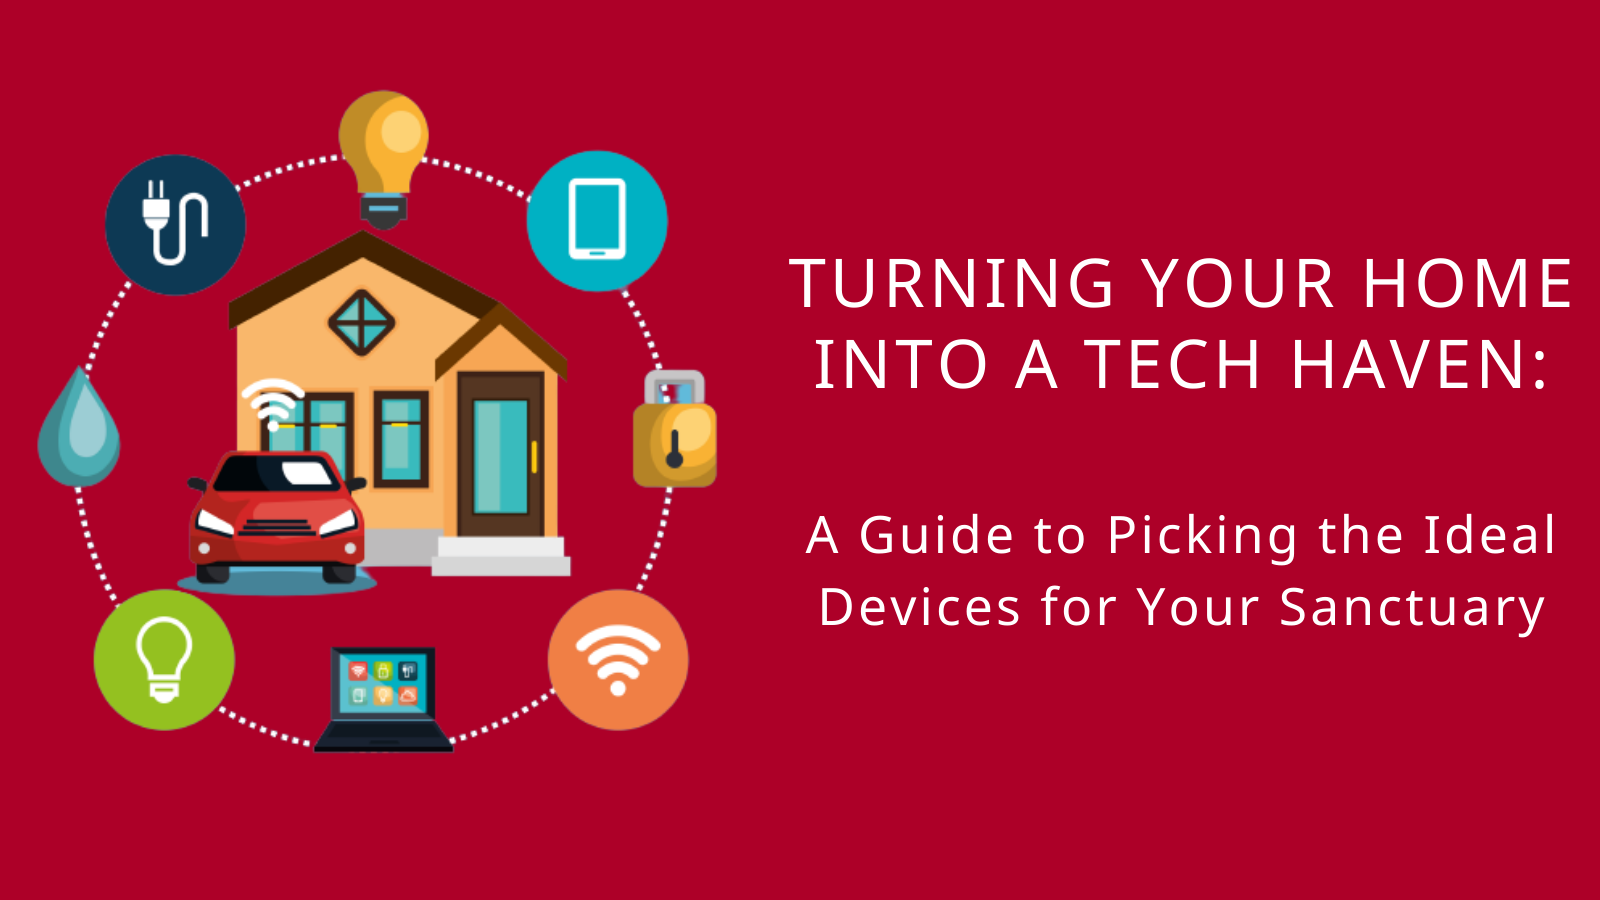 Turning Your Home into a Tech Haven: A Guide to Picking the Ideal Devices for Your Sanctuary